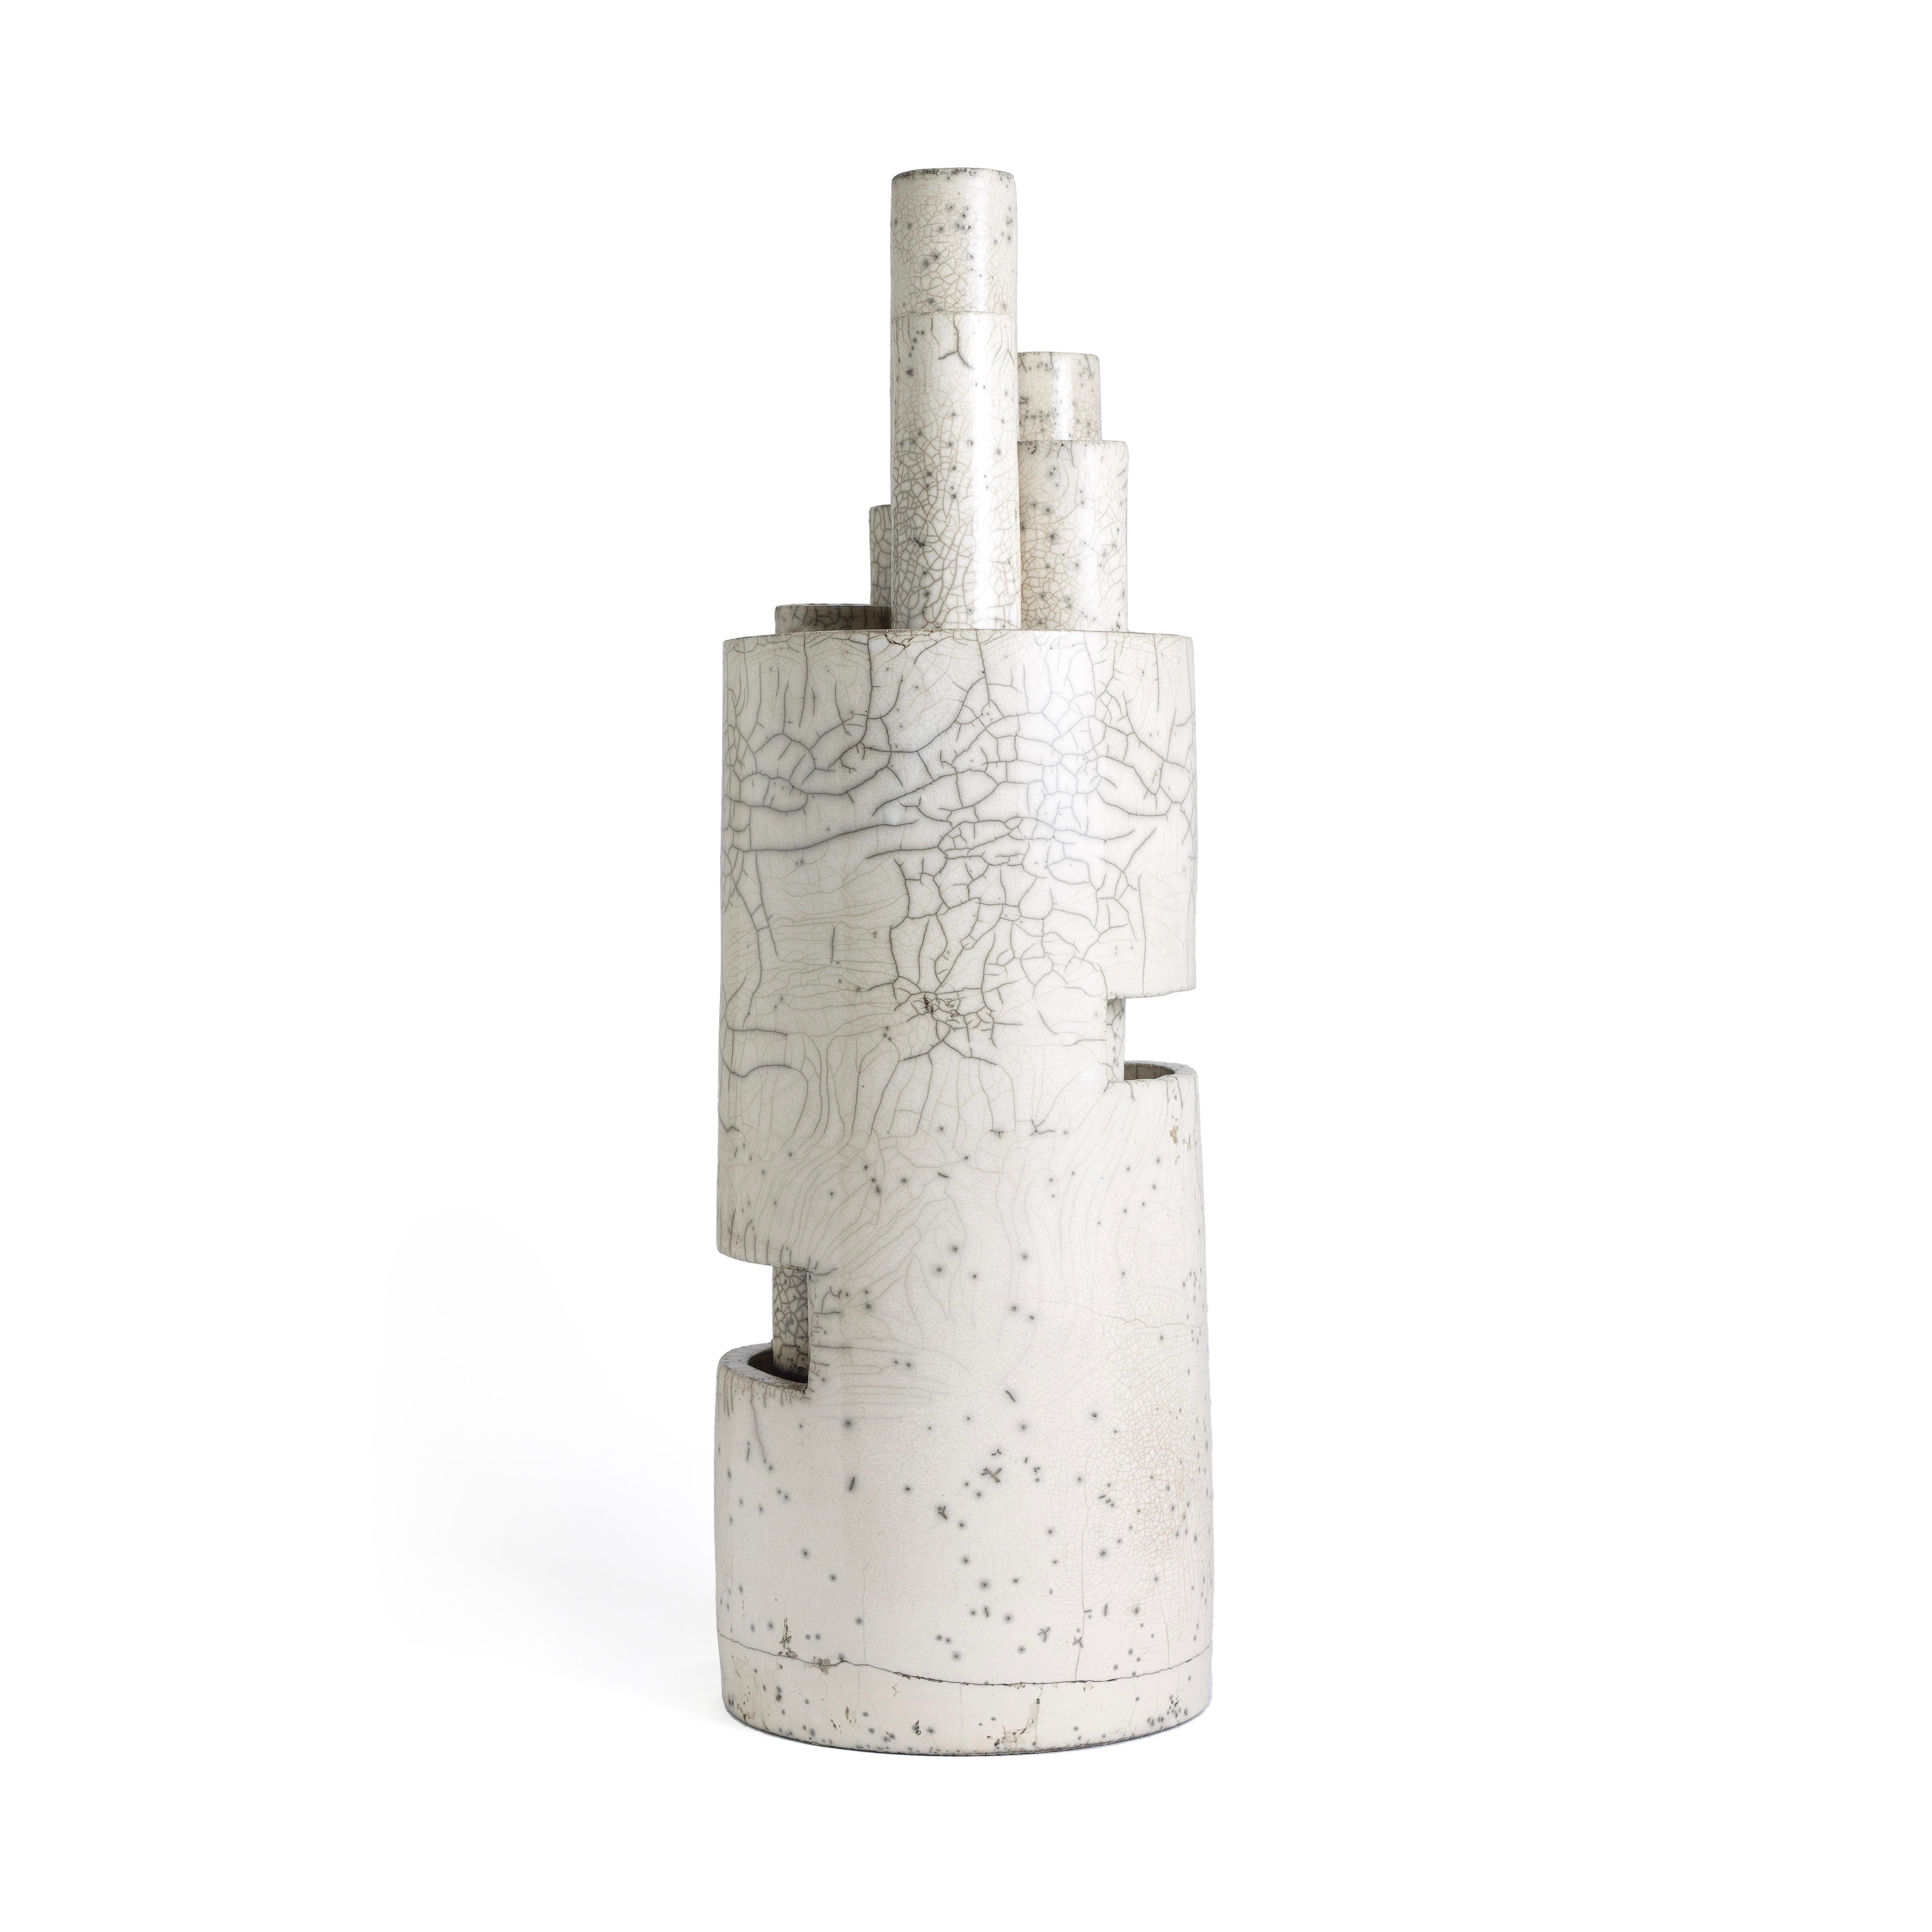 Modern Metropolis L Candle Holder Sculpture Raku Ceramic White Crakle In New Condition For Sale In monza, Monza and Brianza